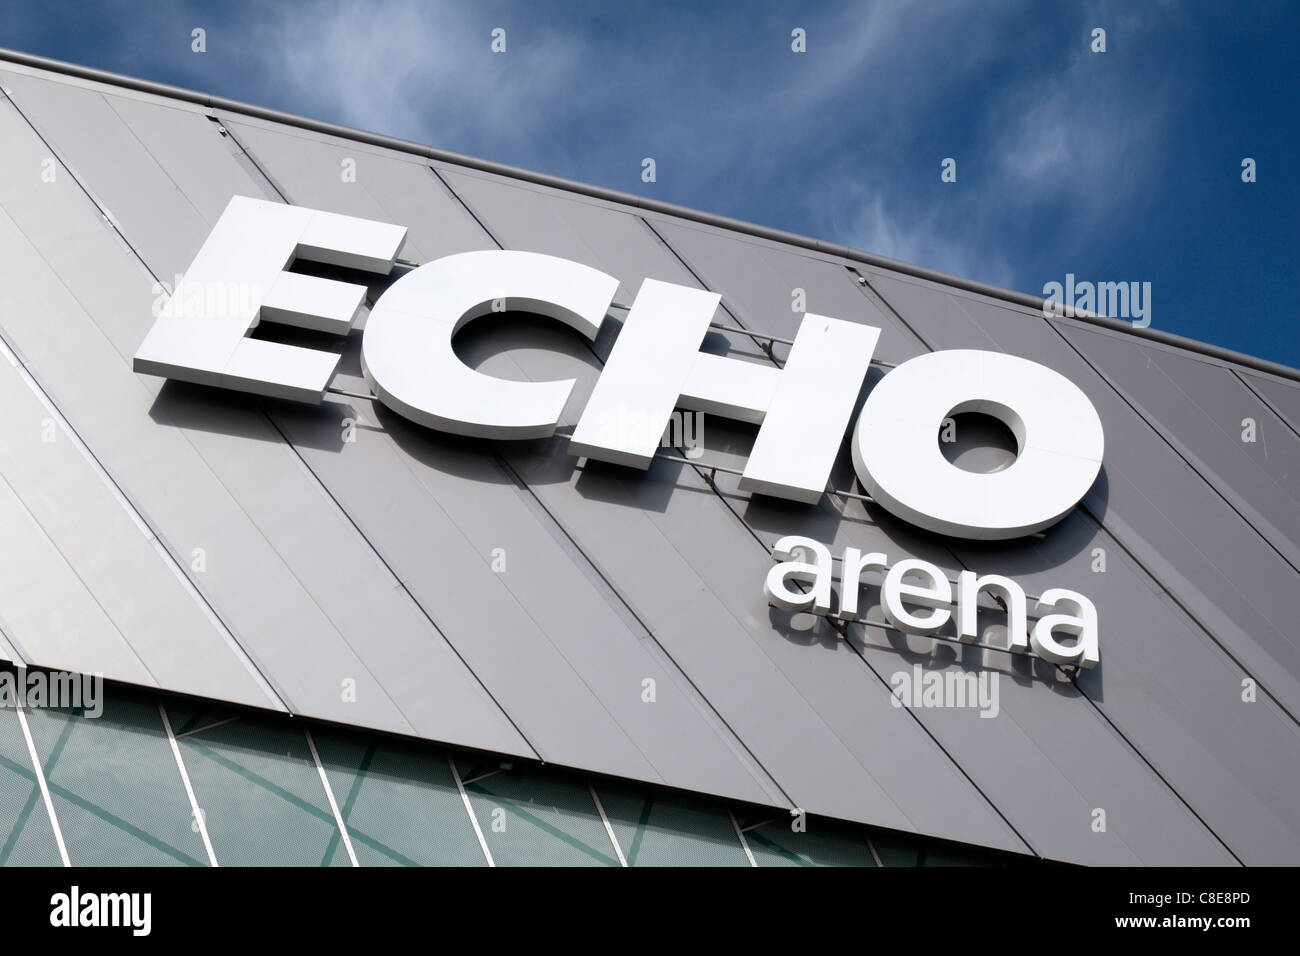 The Echo Arena Liverpool logo, King's Dock, Liverpool Waterfront, England. Stock Photo